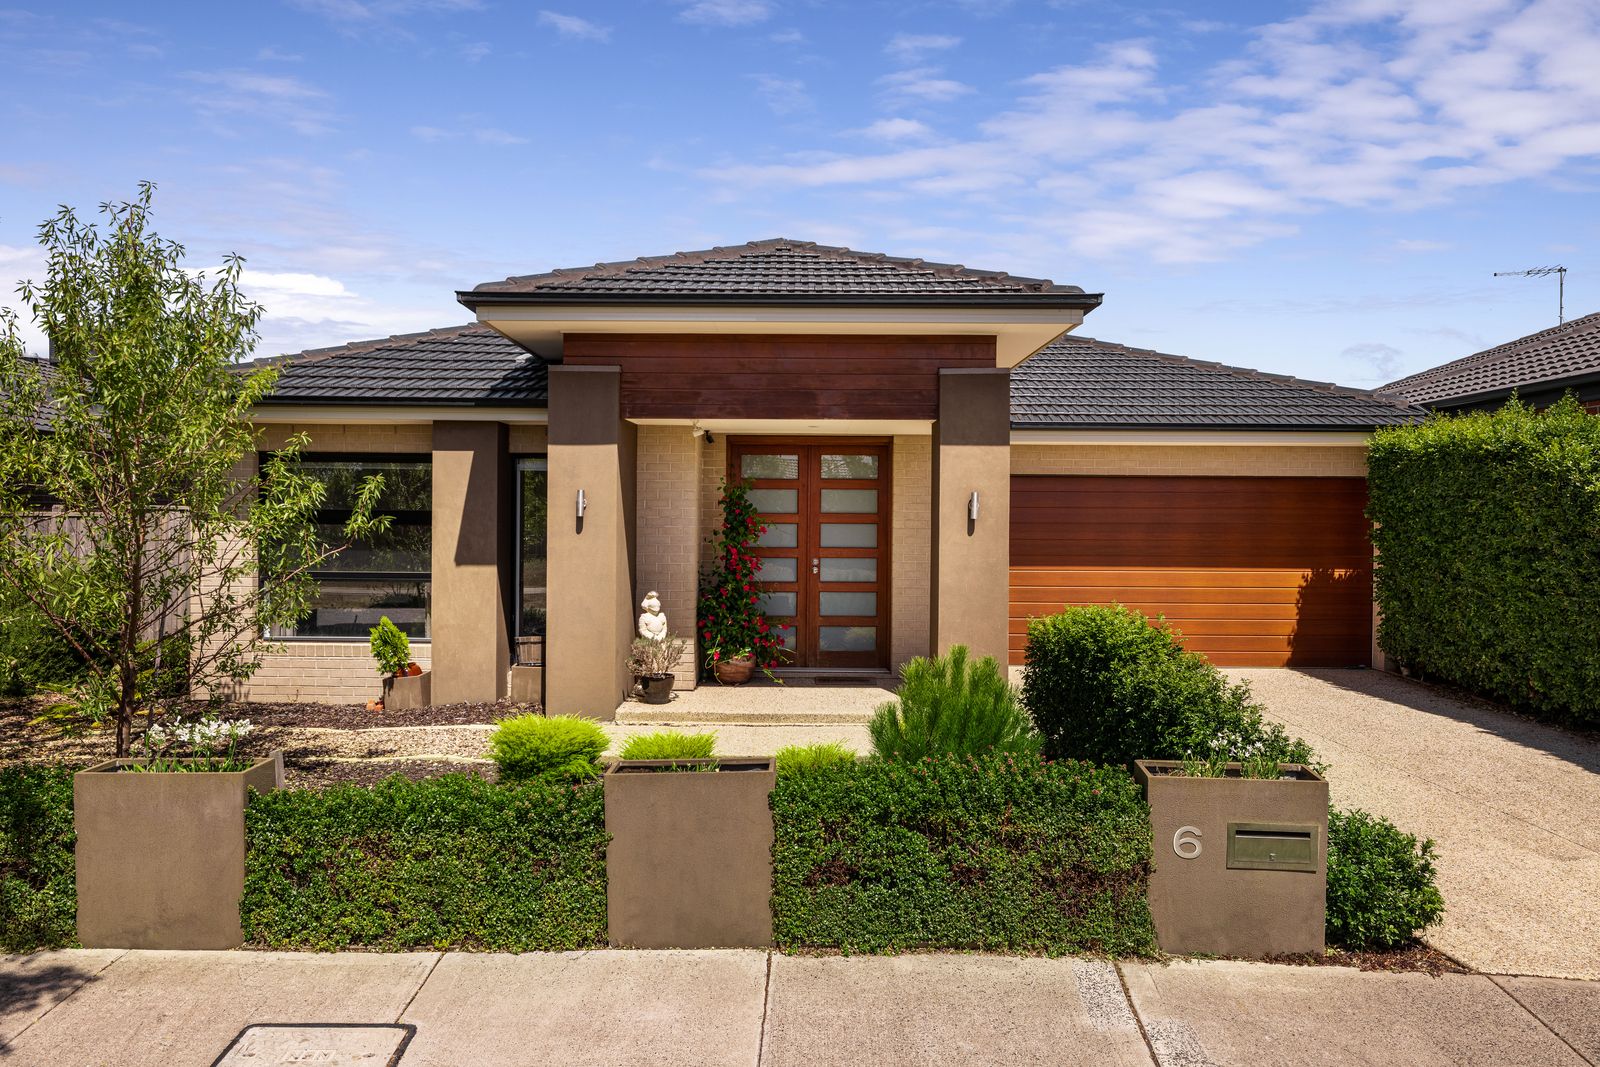 4 bedrooms House in 6 Fairfield Crescent DIGGERS REST VIC, 3427